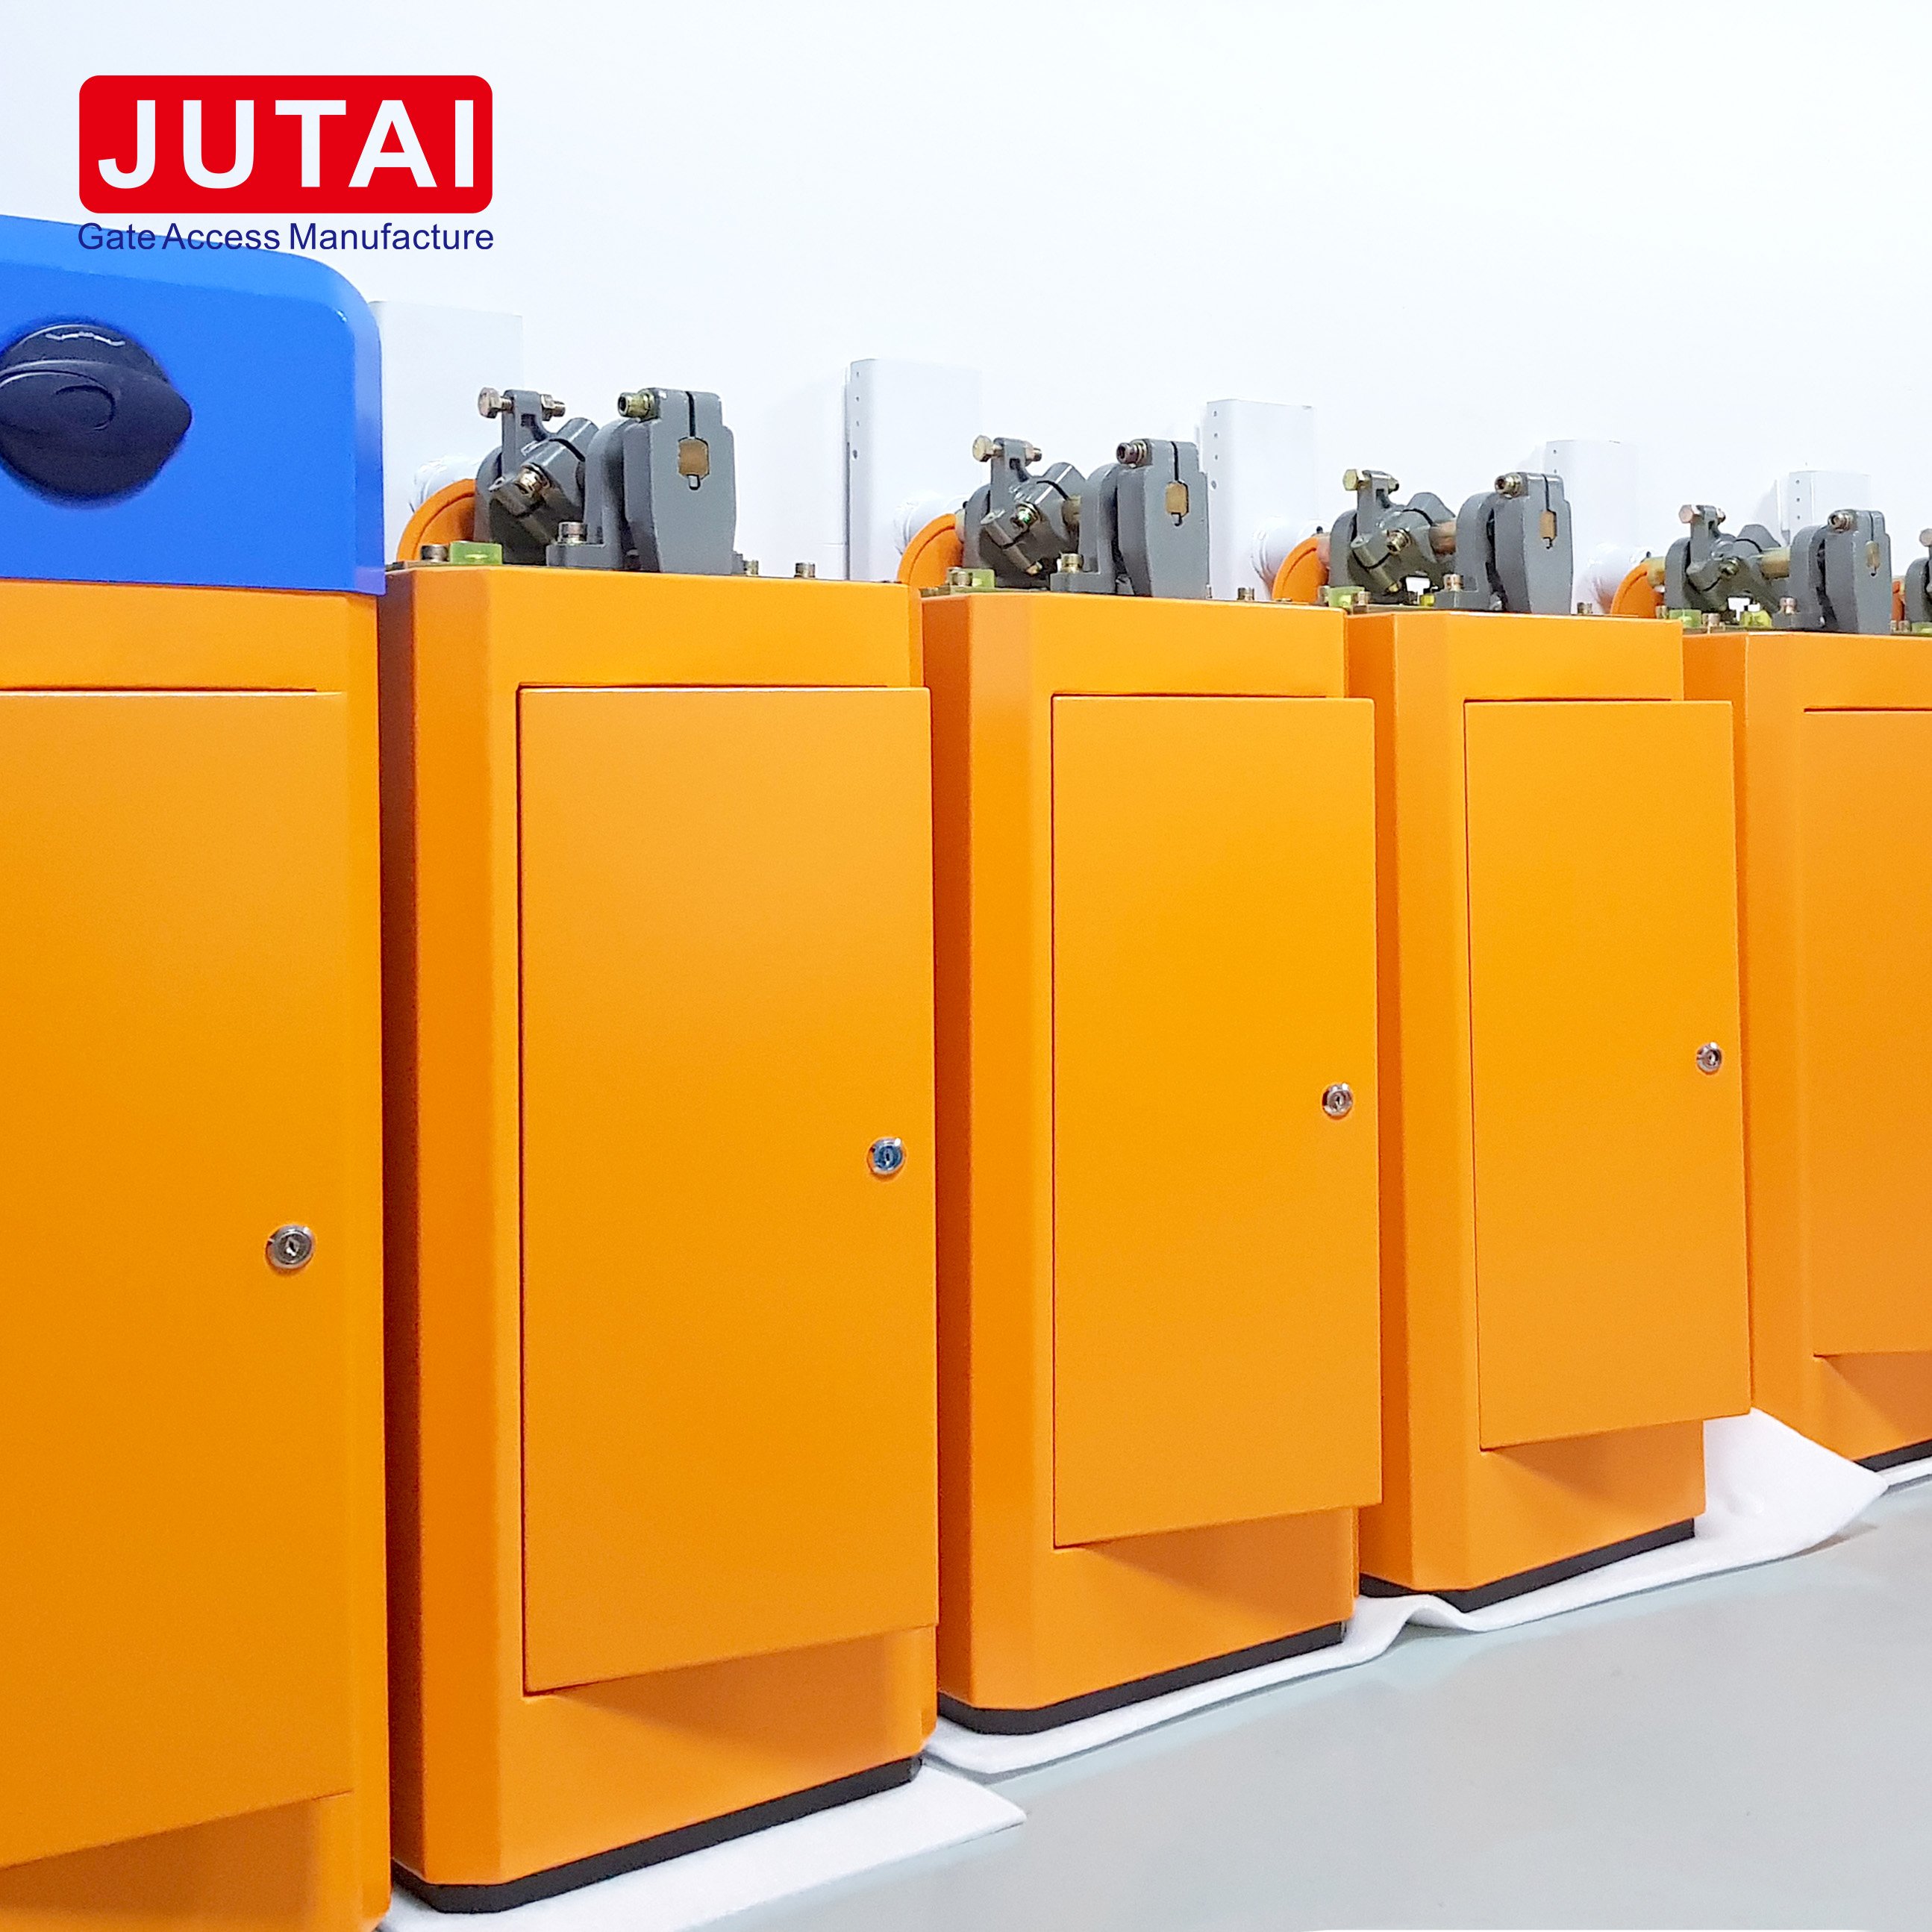 JUTAI Parking Barrier Gate Access with Long Range RFID Reader Open Automatic